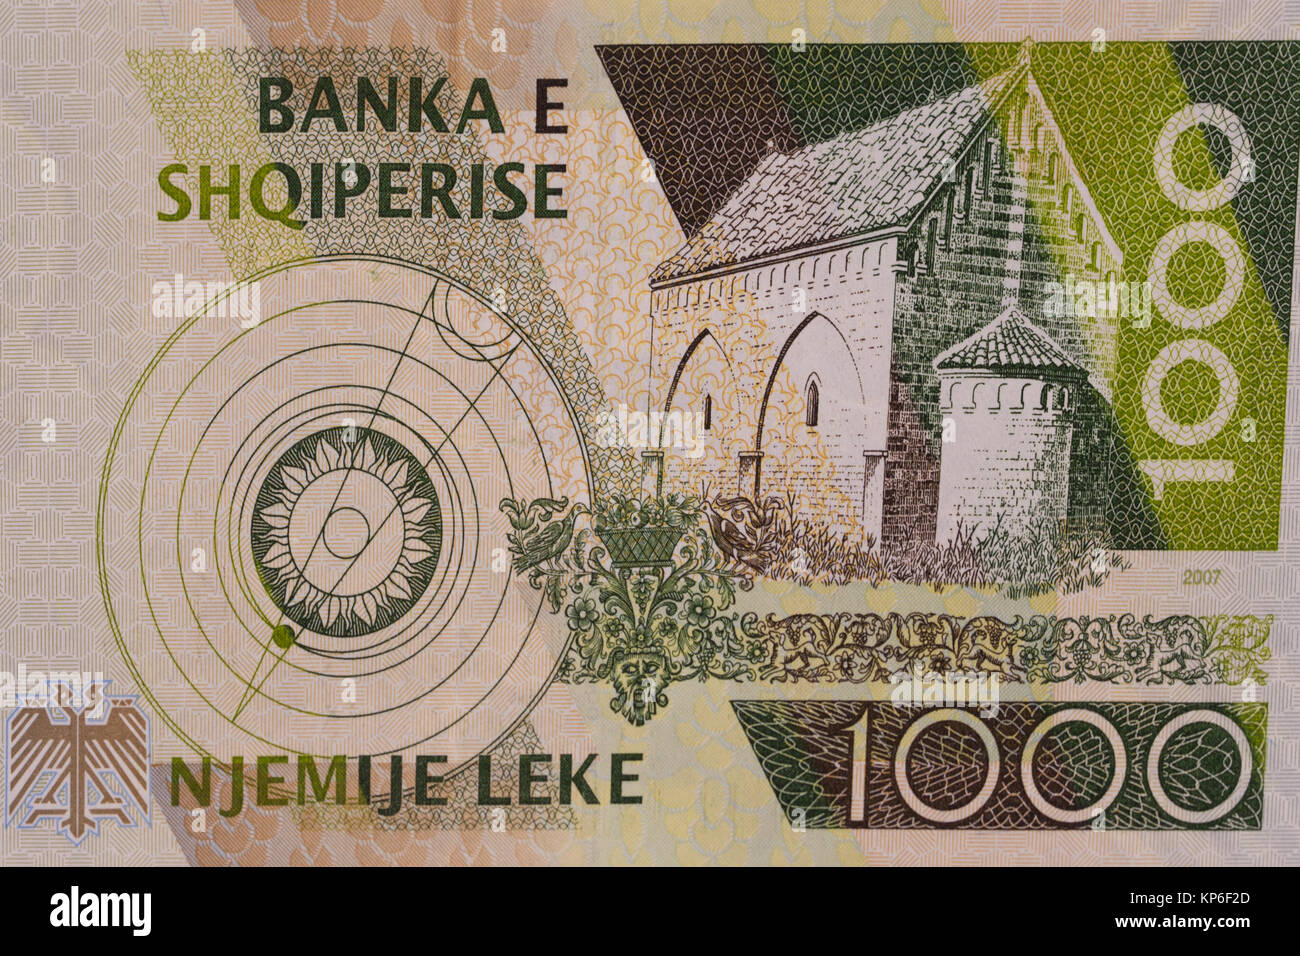 Reverse of Albanian currency one thousand 1000 Lek banknote Stock Photo